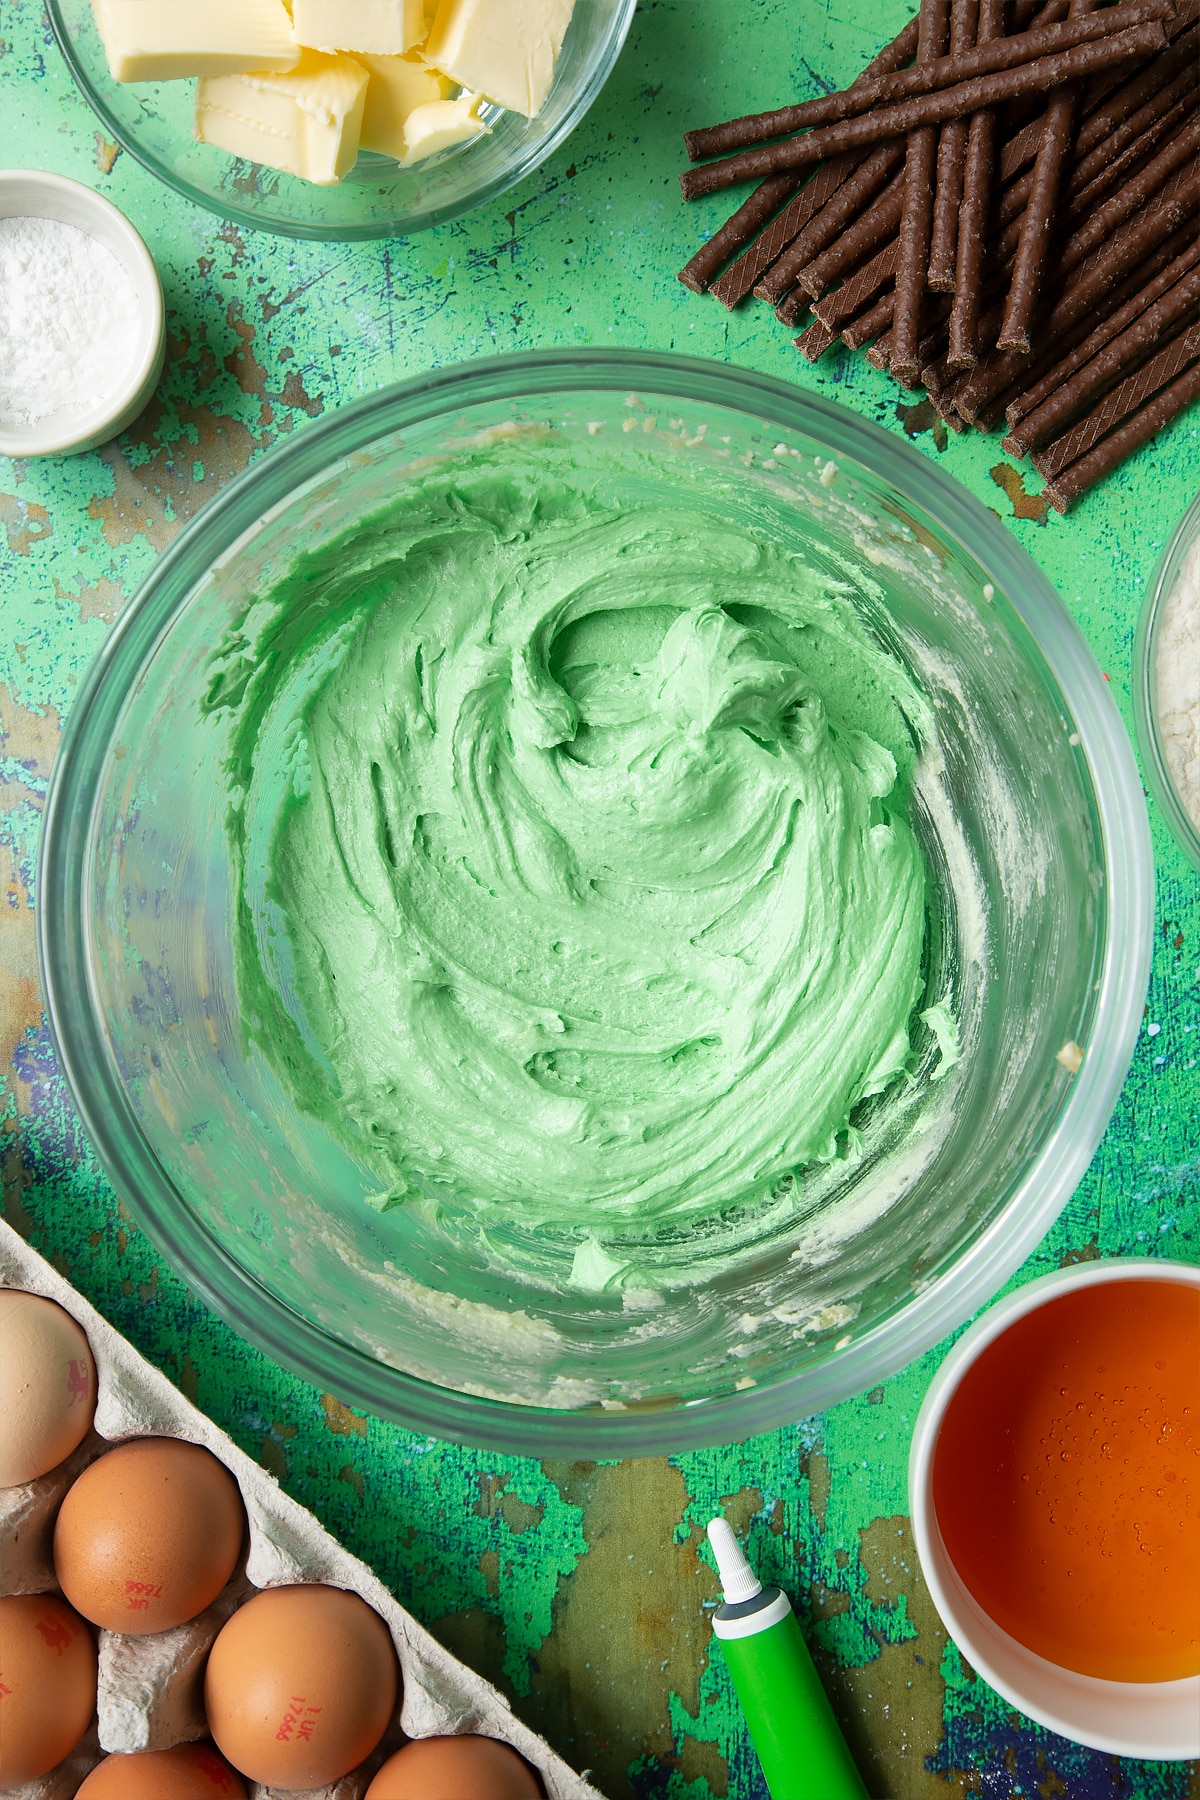 Creamed butter, sugar and green food colouring in a mixing bowl. Ingredients to make Matchmaker cookies surround the bowl.